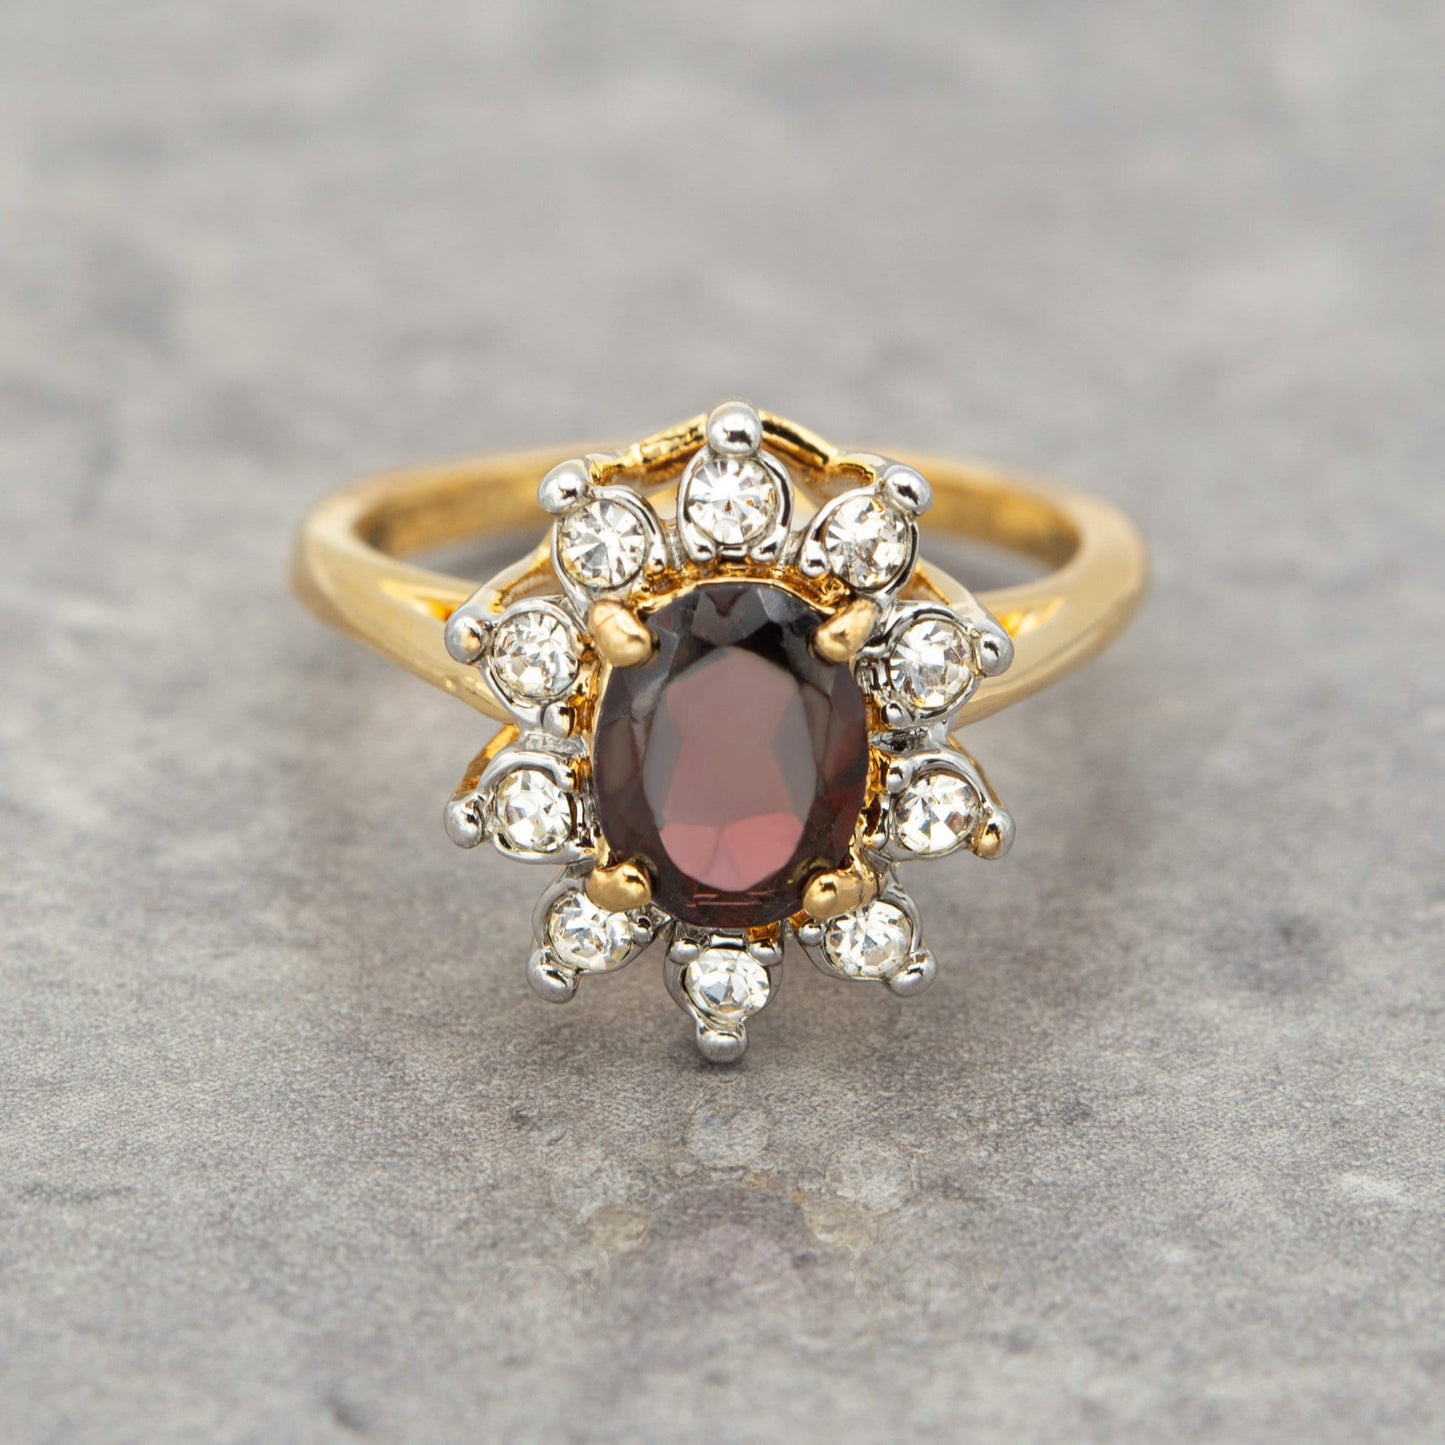 Vintage Genuine Garnet and Clear Austrian Crystals Women's Ring 18kt Gold Electroplated R617 January Birthstone